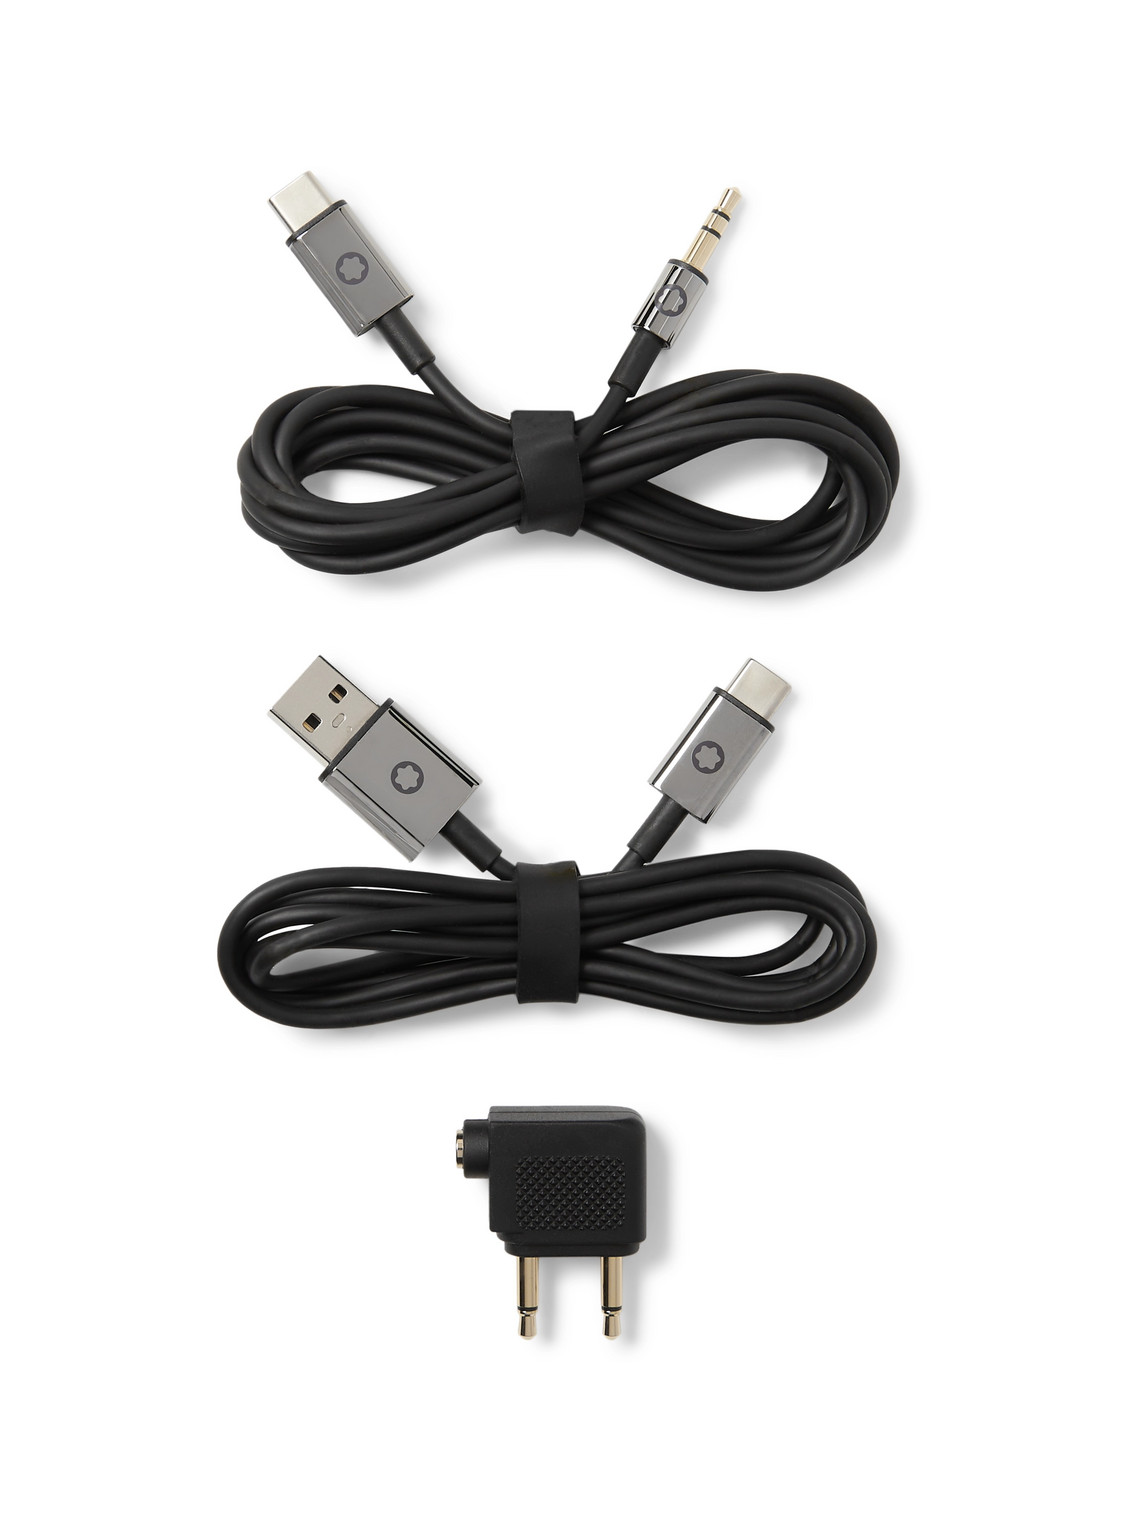 Montblanc Mb 01 Travel Charger And Cable Set In Black